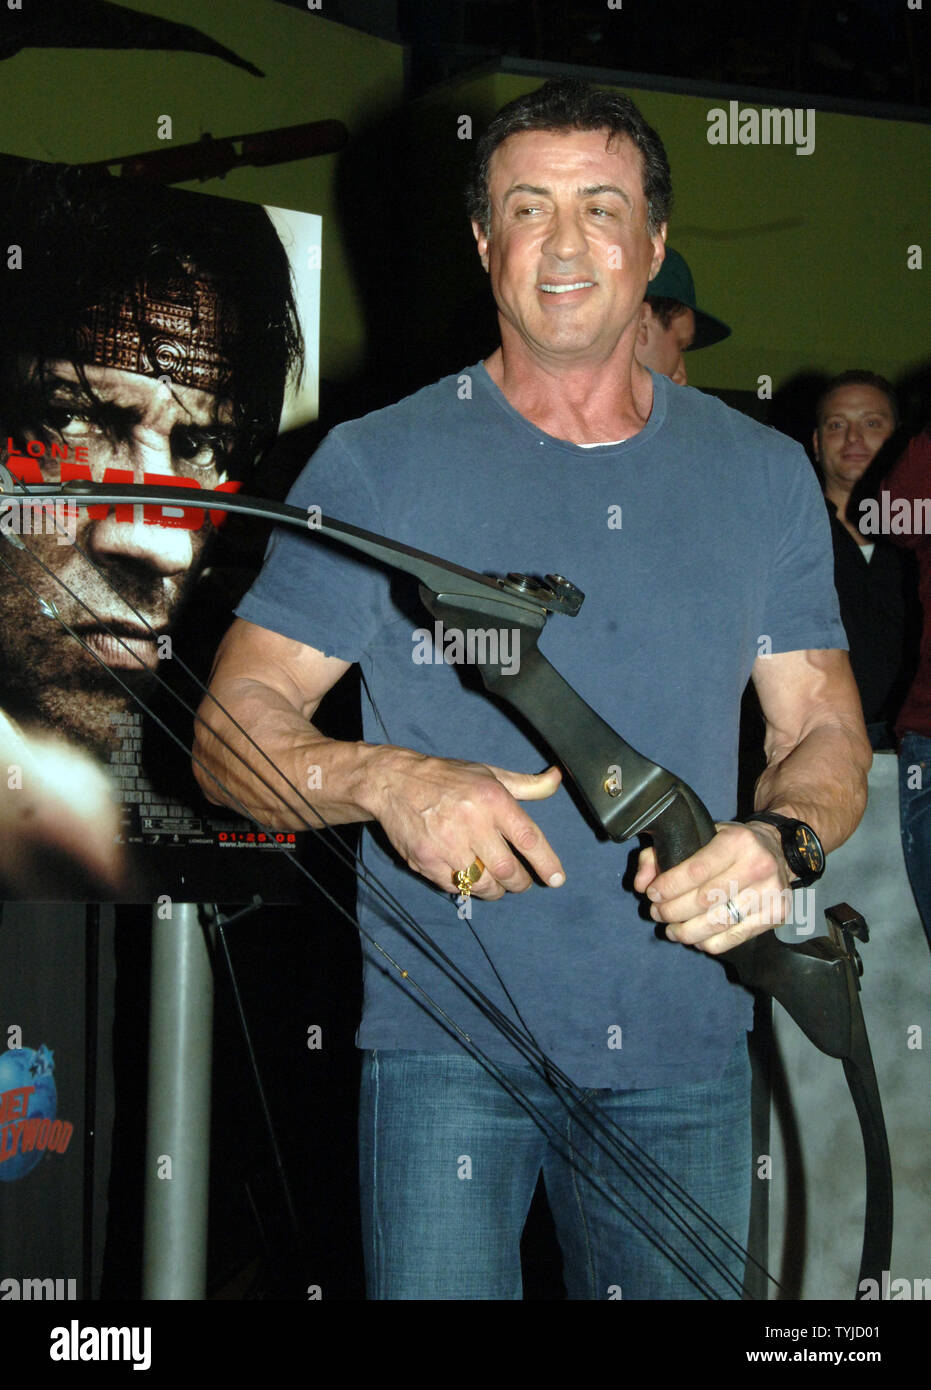 Actor Sylvester Stallone appears at Planet Hollywood in New York to present the bow and arrow that he used in his latest film "Rambo" on January 17, 2008. (UPI Photo/Ezio Petersen) Stock Photo